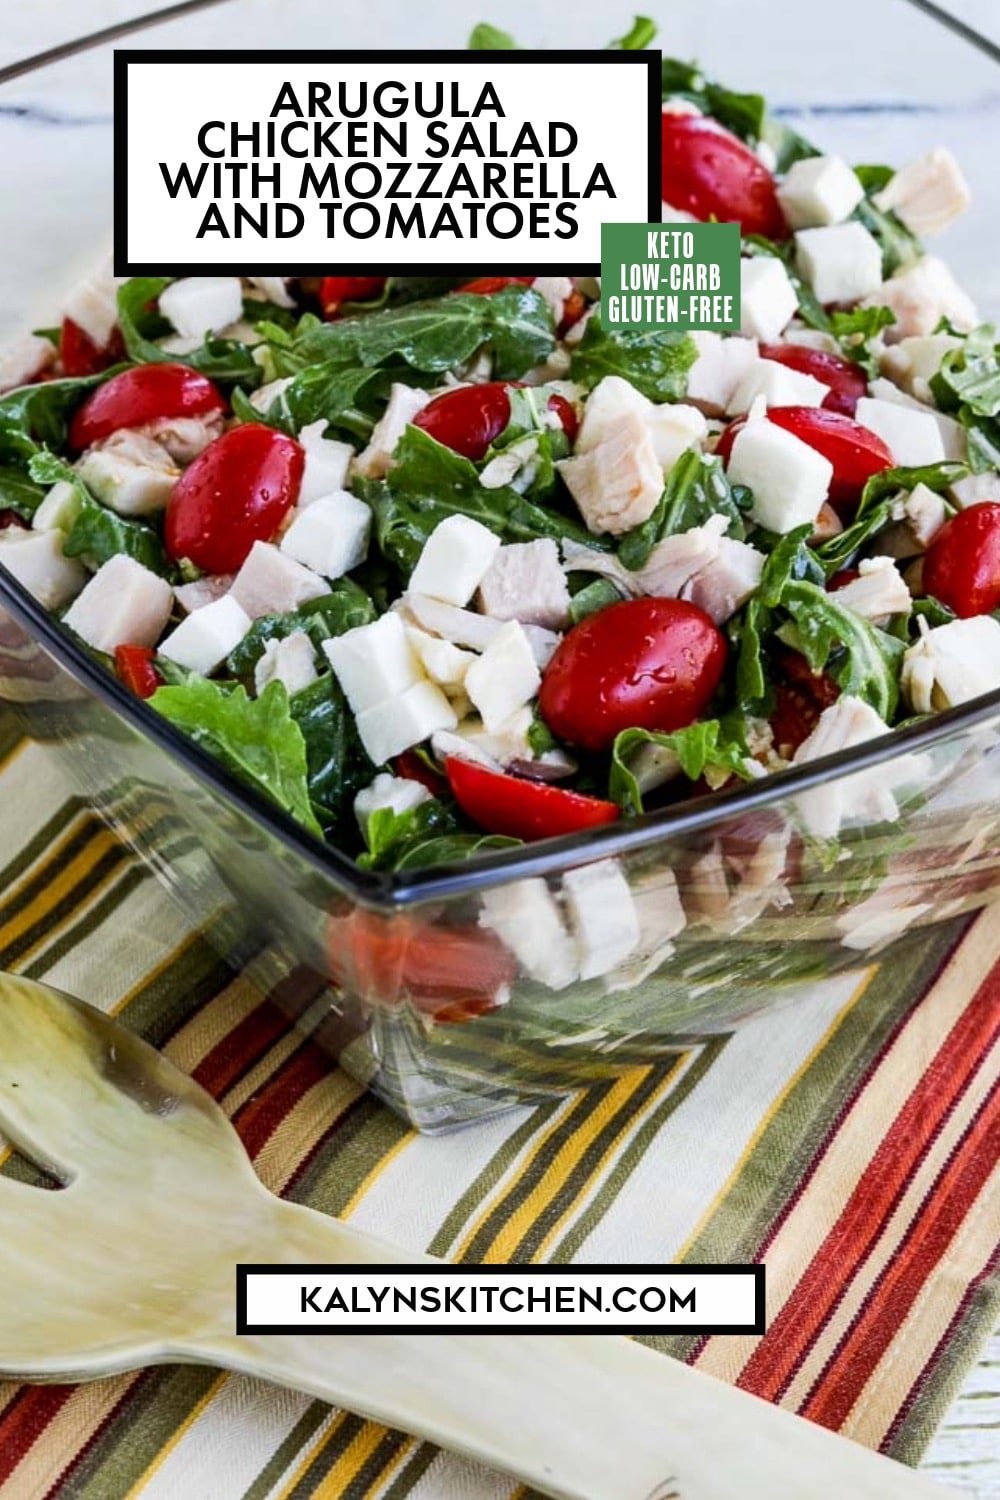 Pinterest image of Arugula Chicken Salad with Mozzarella and Tomatoes